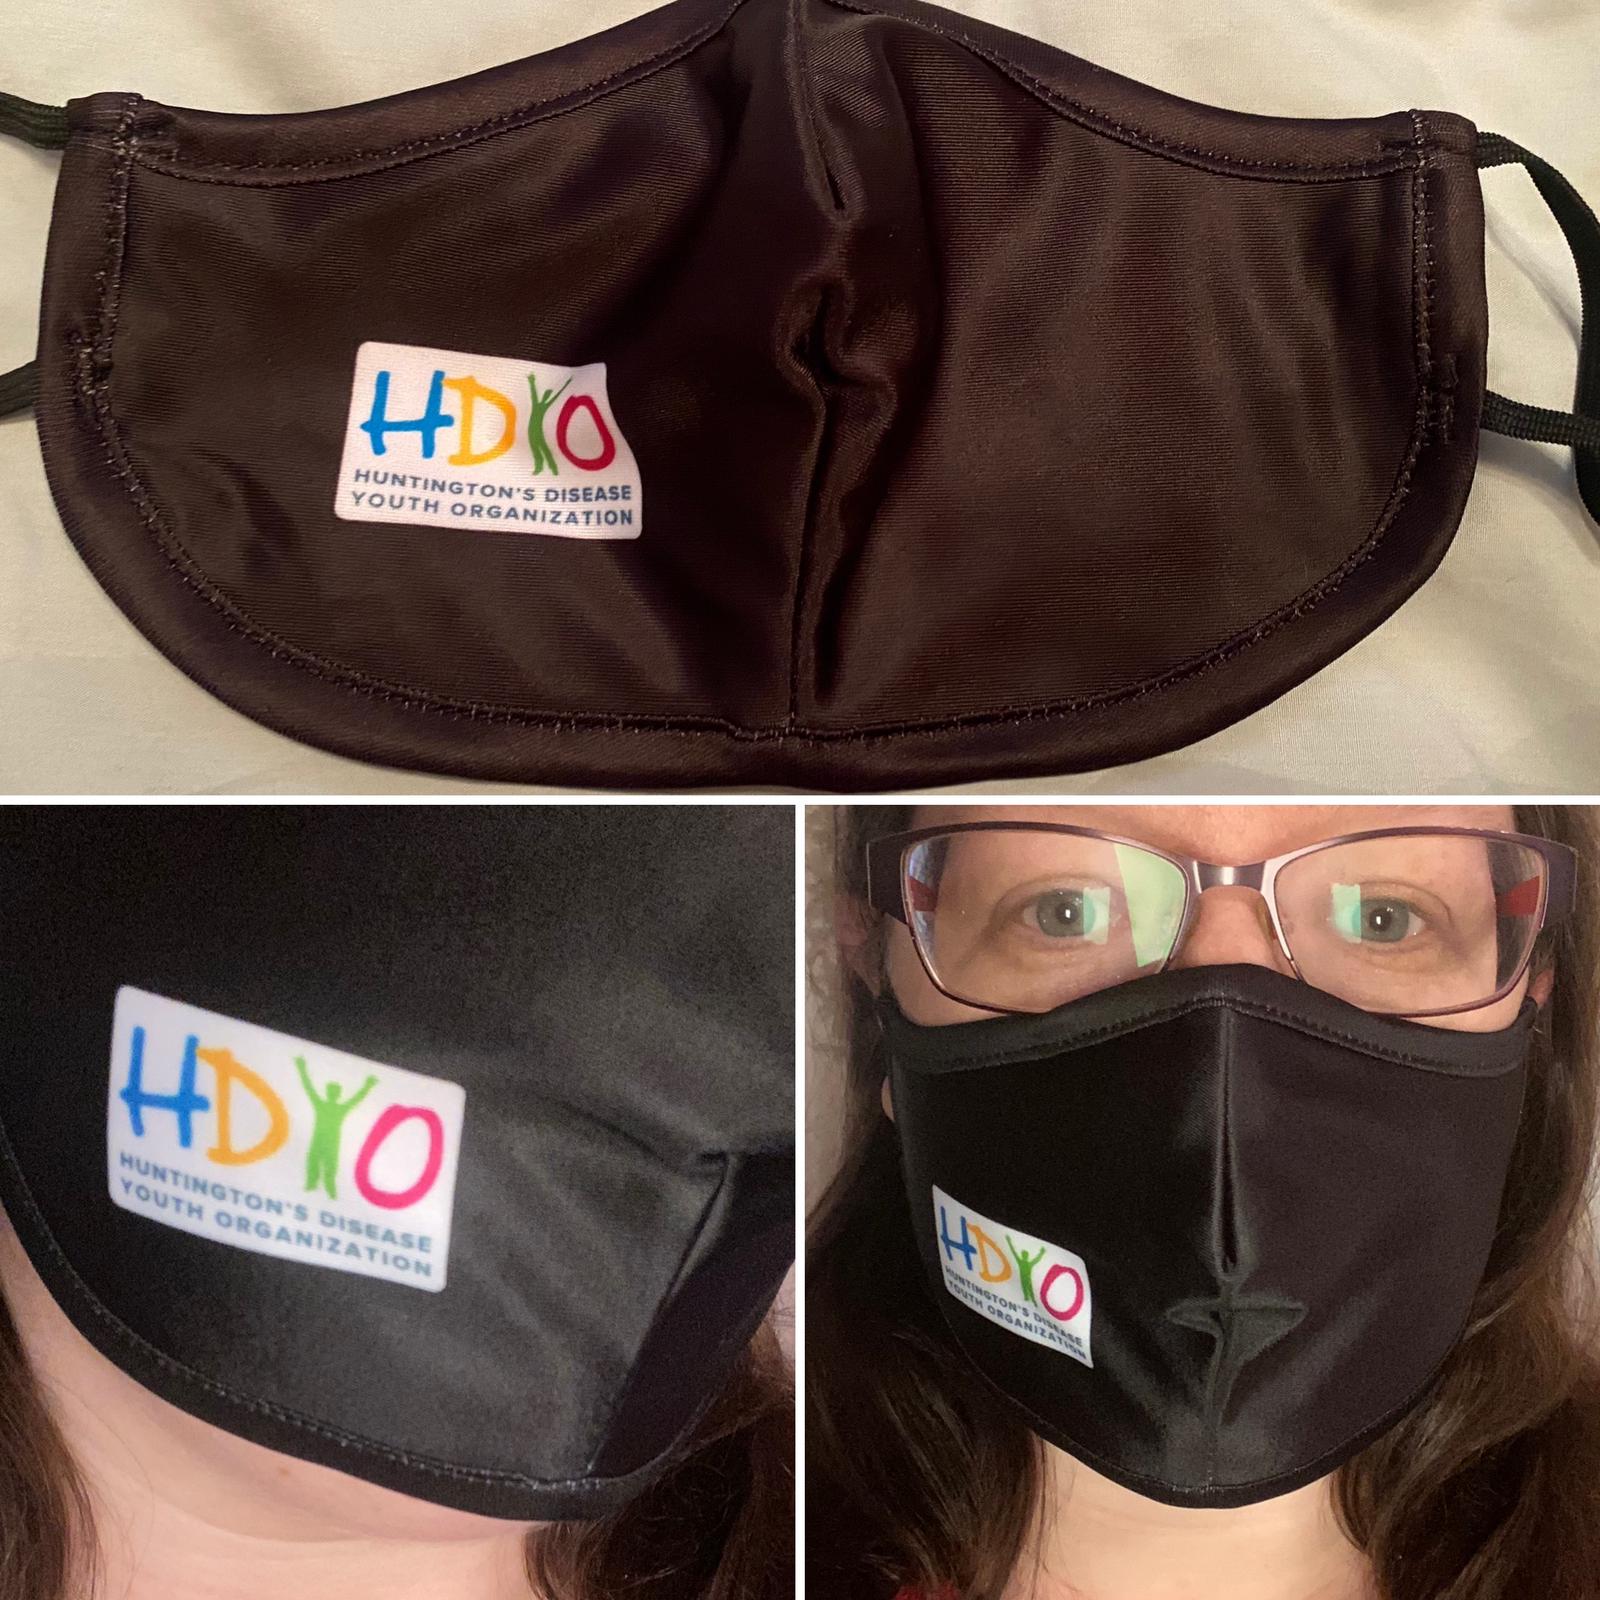 HDYO Reusable Face Coverings - Black